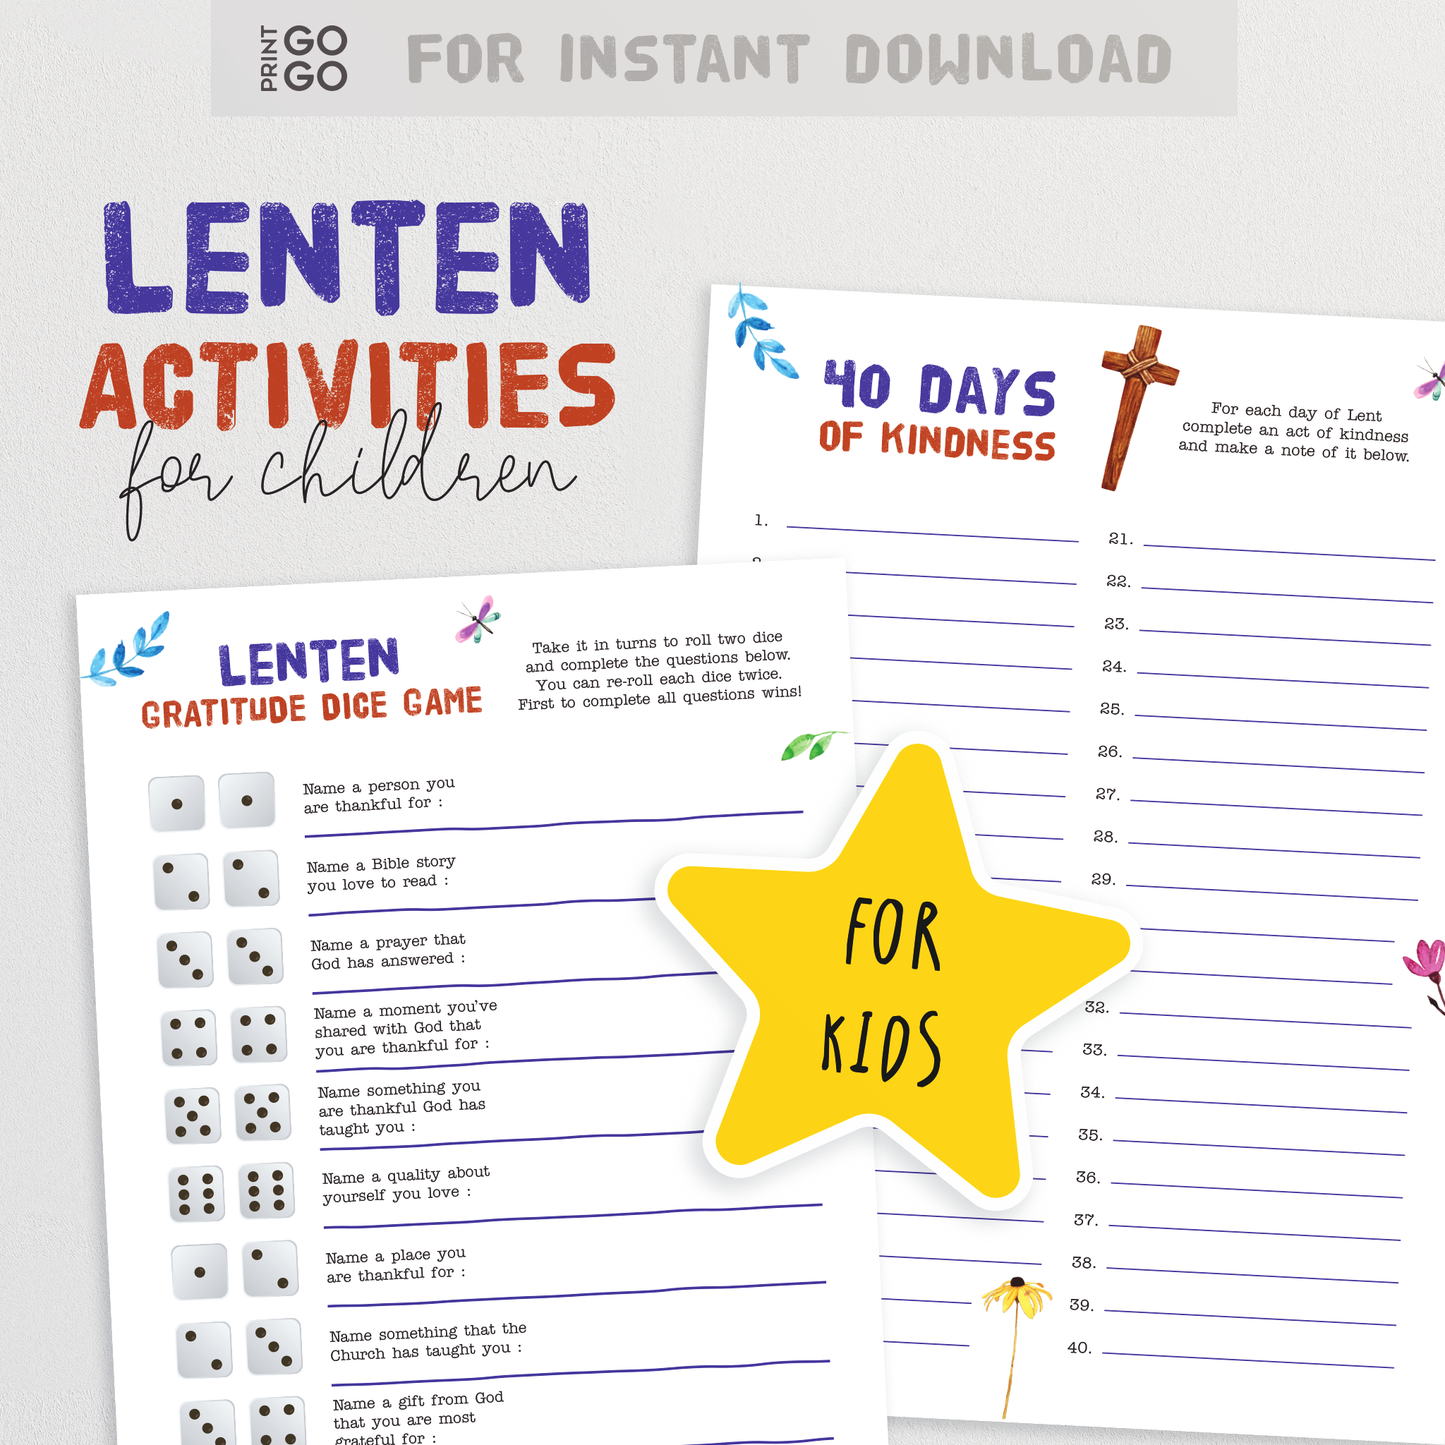 Lenten Activities for Children - Including Lent Gratitude Dice Game and 40 Days of Kindness